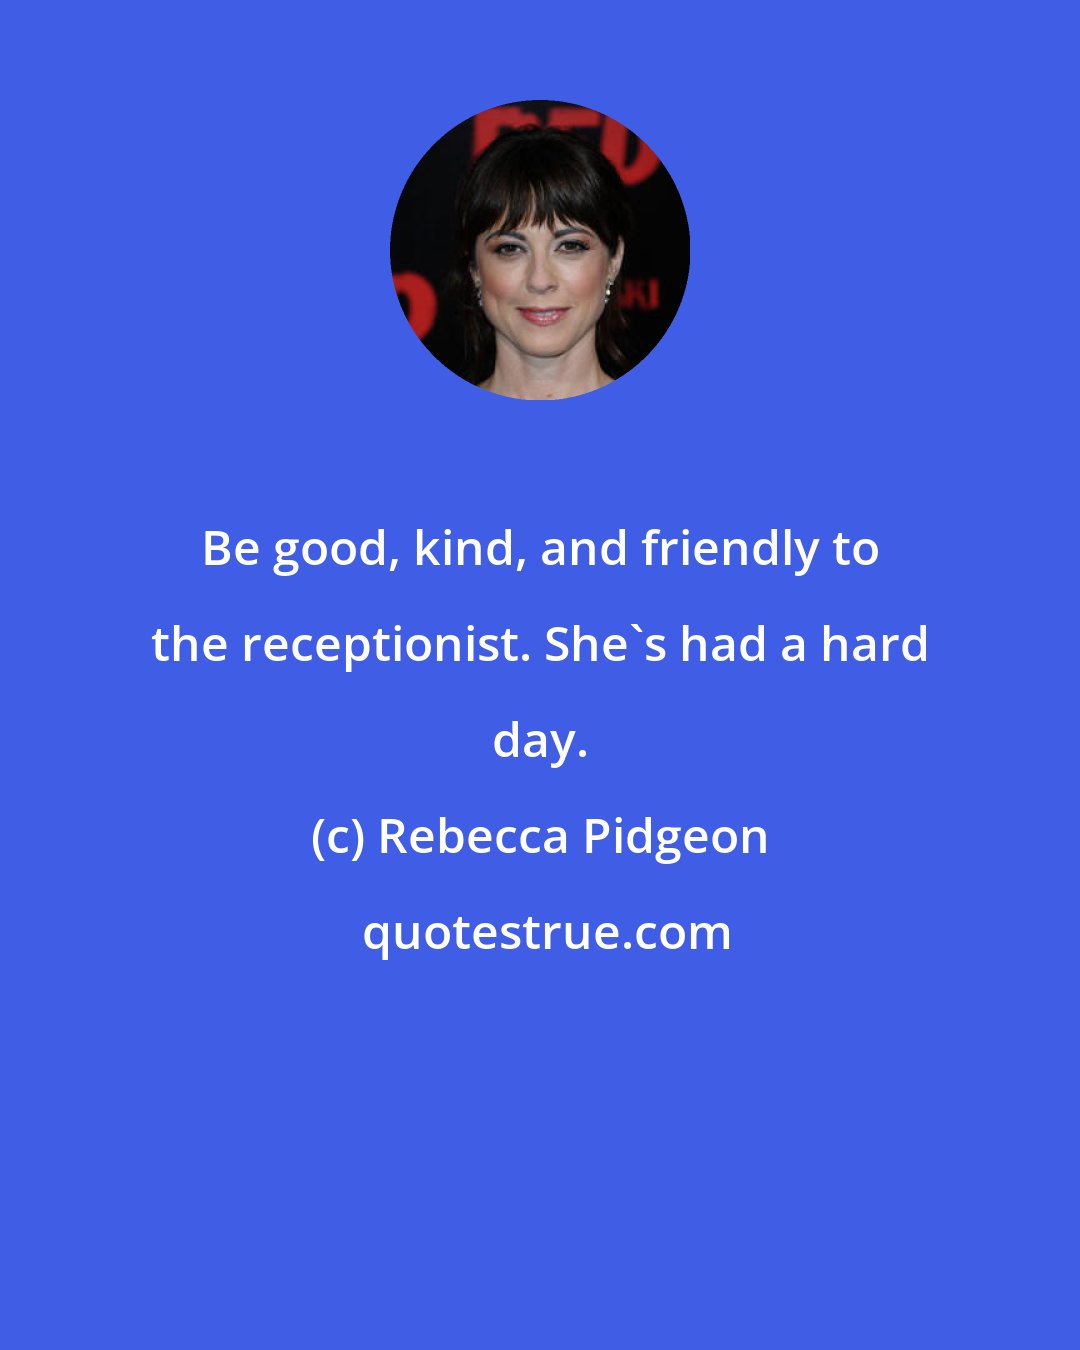 Rebecca Pidgeon: Be good, kind, and friendly to the receptionist. She's had a hard day.